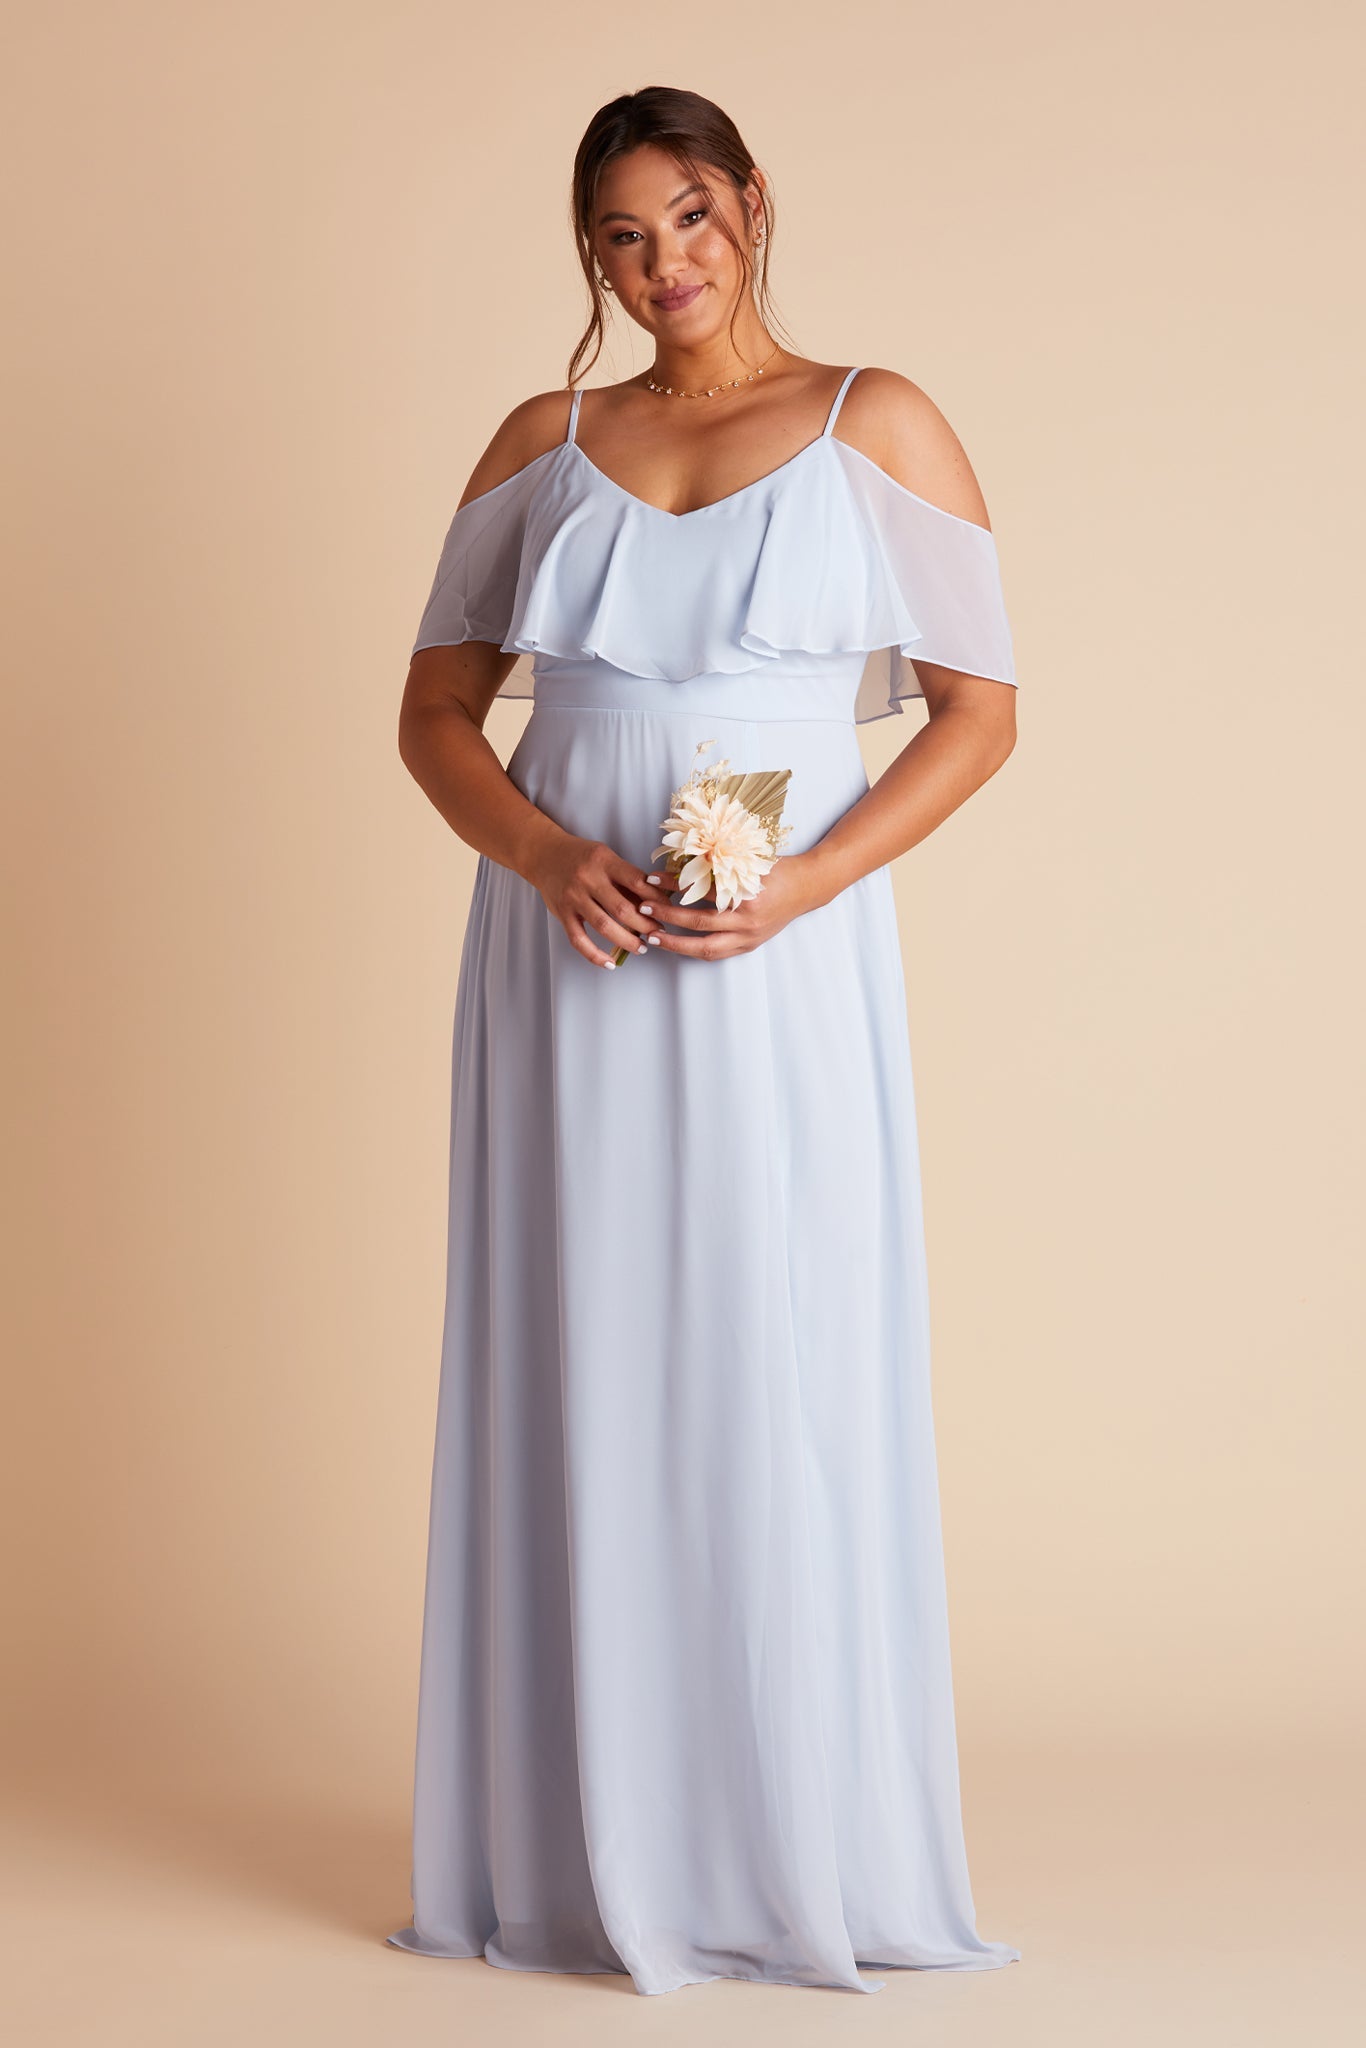 Jane convertible plus size bridesmaid dress in ice blue chiffon by Birdy Grey, front view